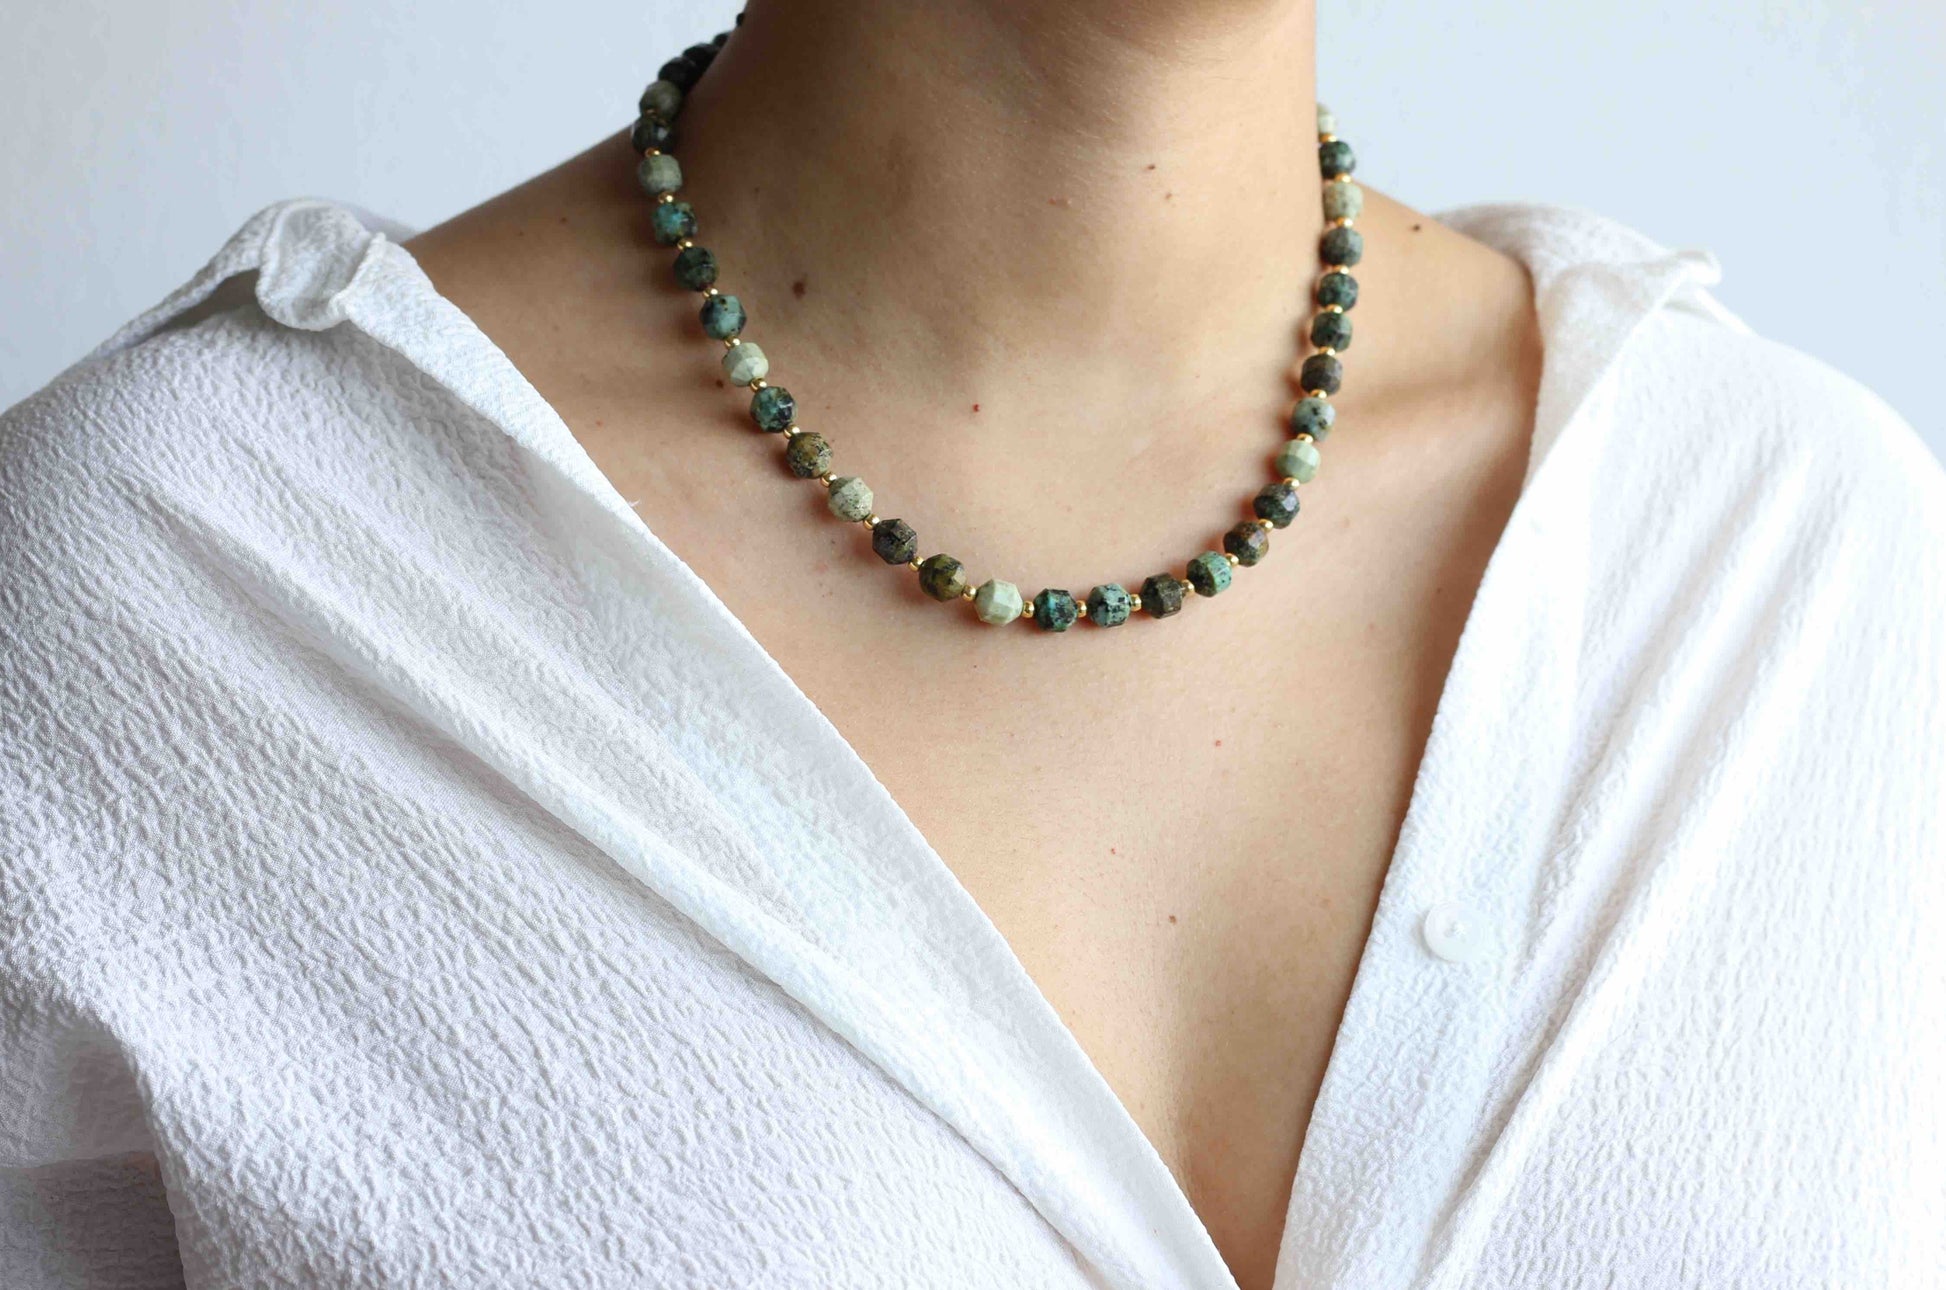 African Turquoise Beaded Gemstone Necklace with 14k gold plated sterling silver beads, silver jewelry, gemstone jewelry